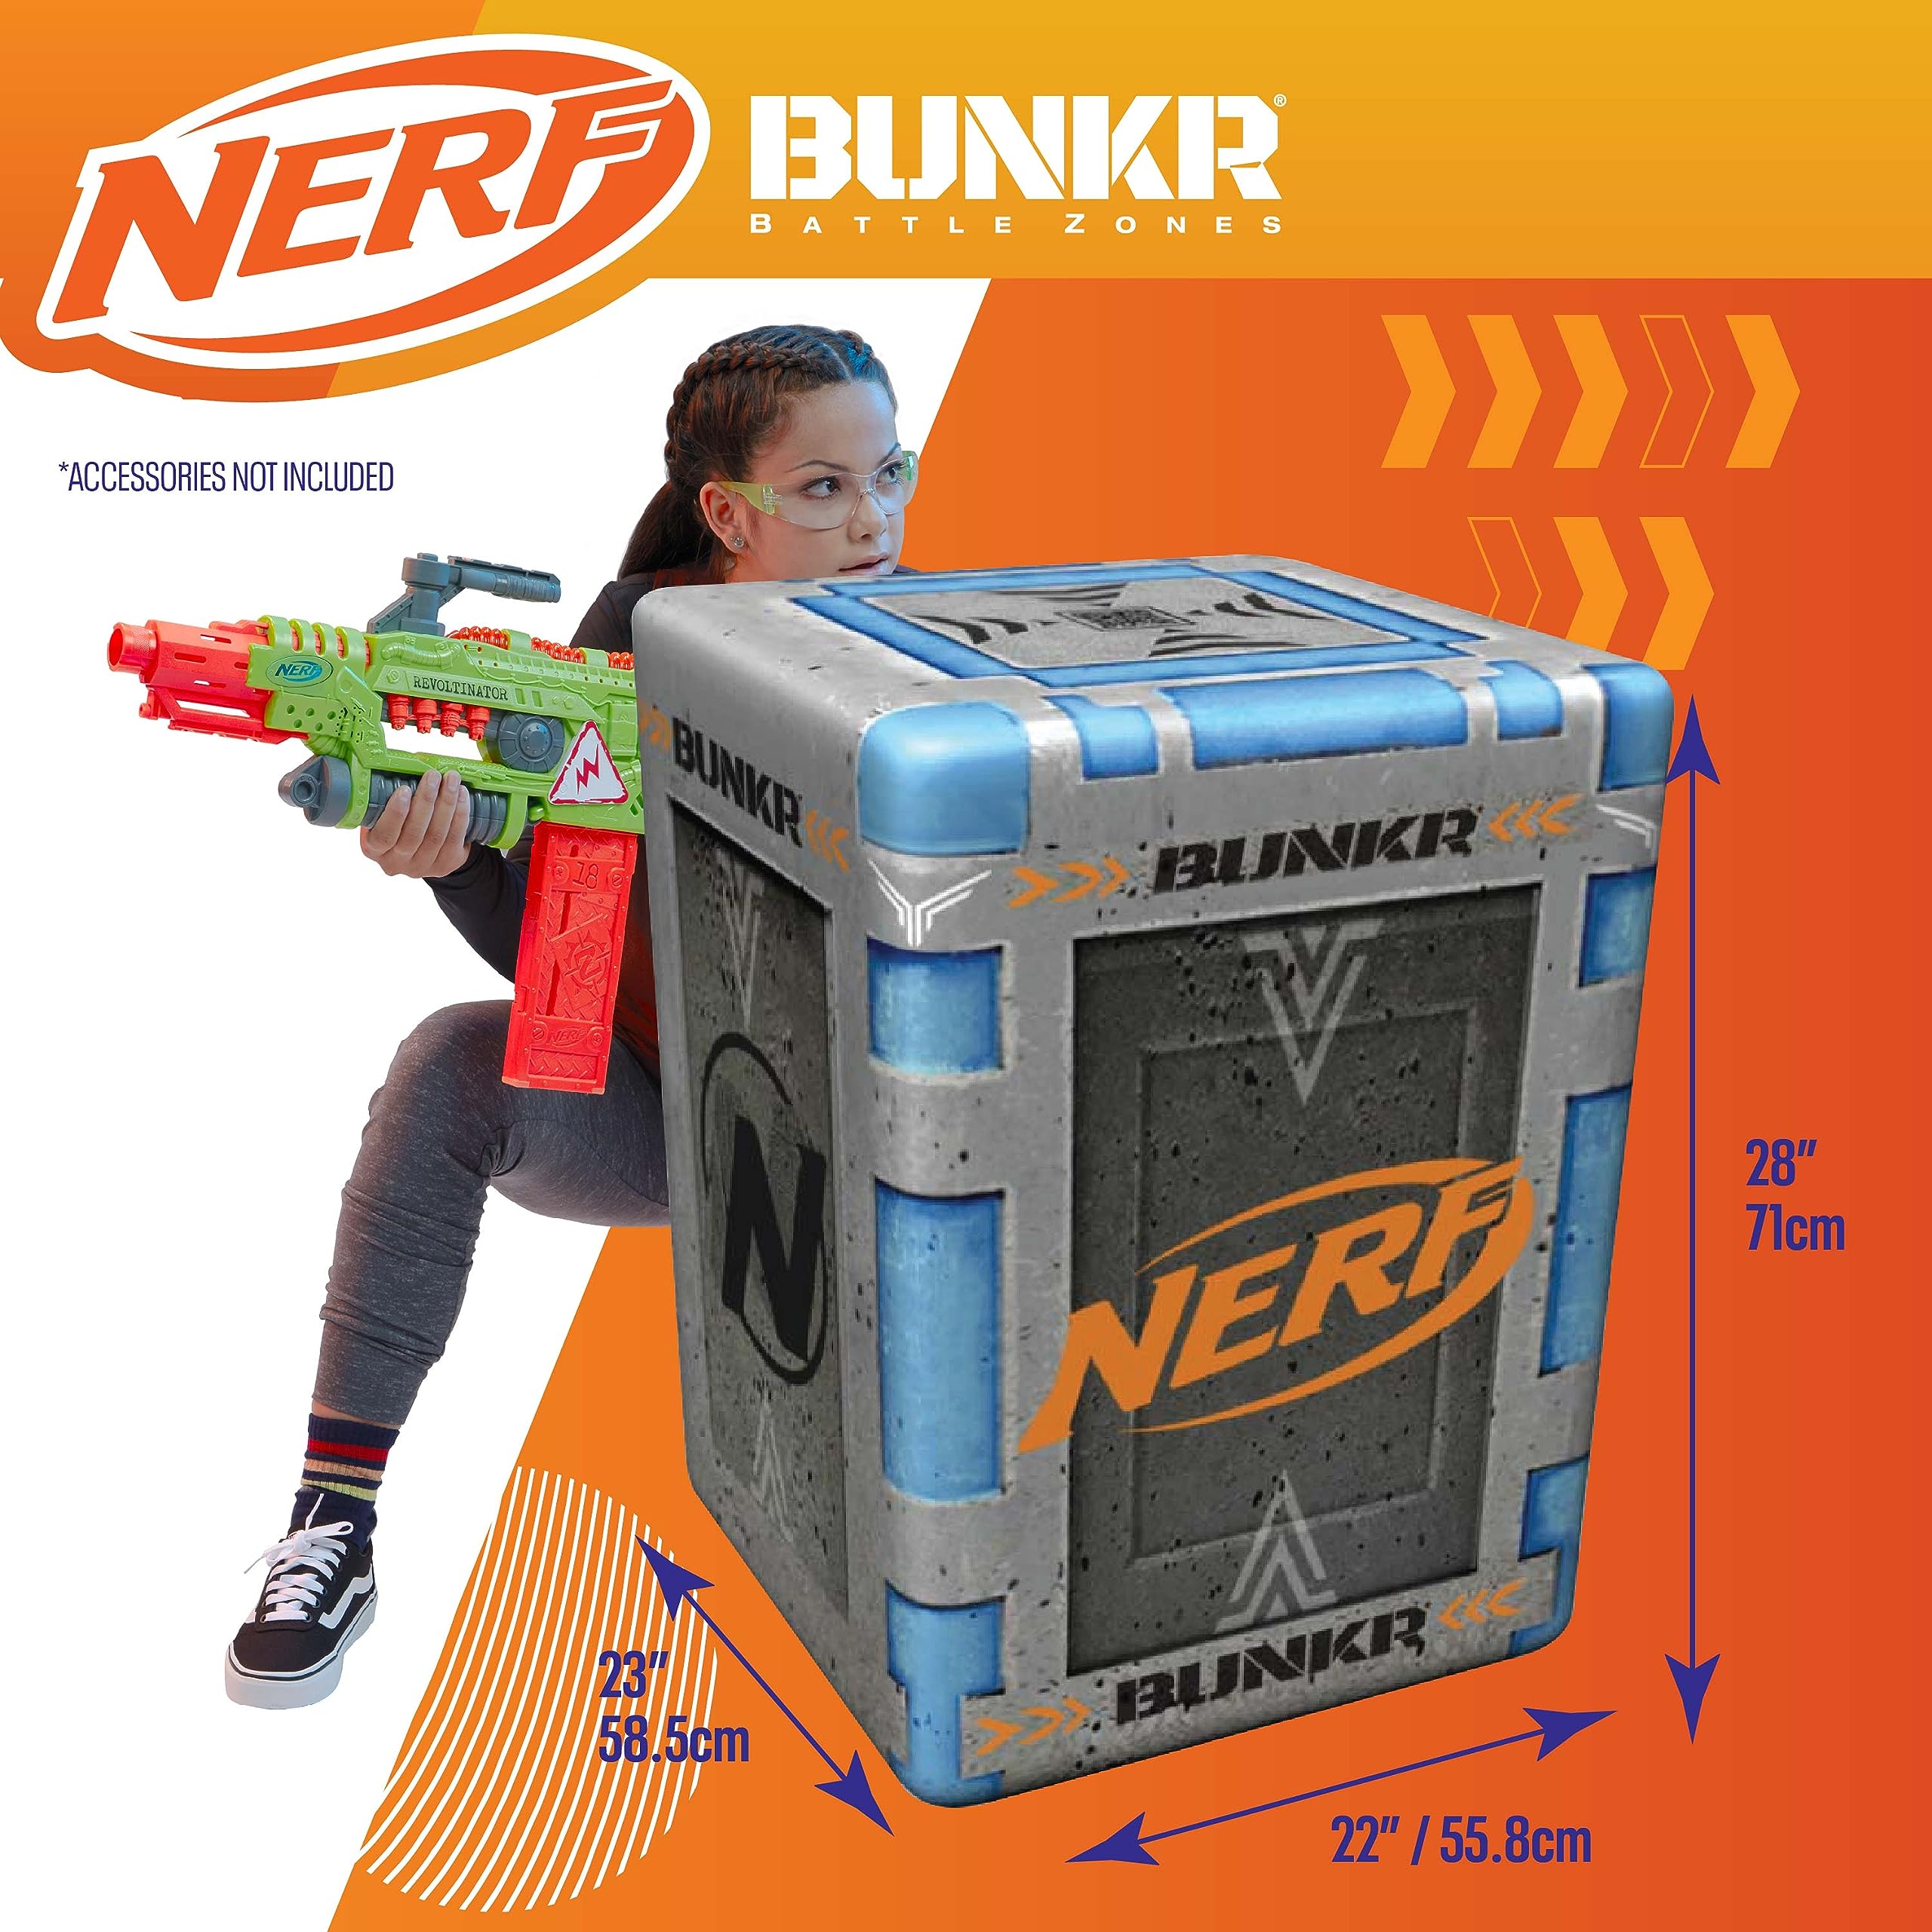 NERF BUNKR Officially Licensed Battle Royale Inflatable Bunker Battlezone - 5 Piece Barricade Set Crates Barrels - Perfect for NERF Party - NERF War Multicolor